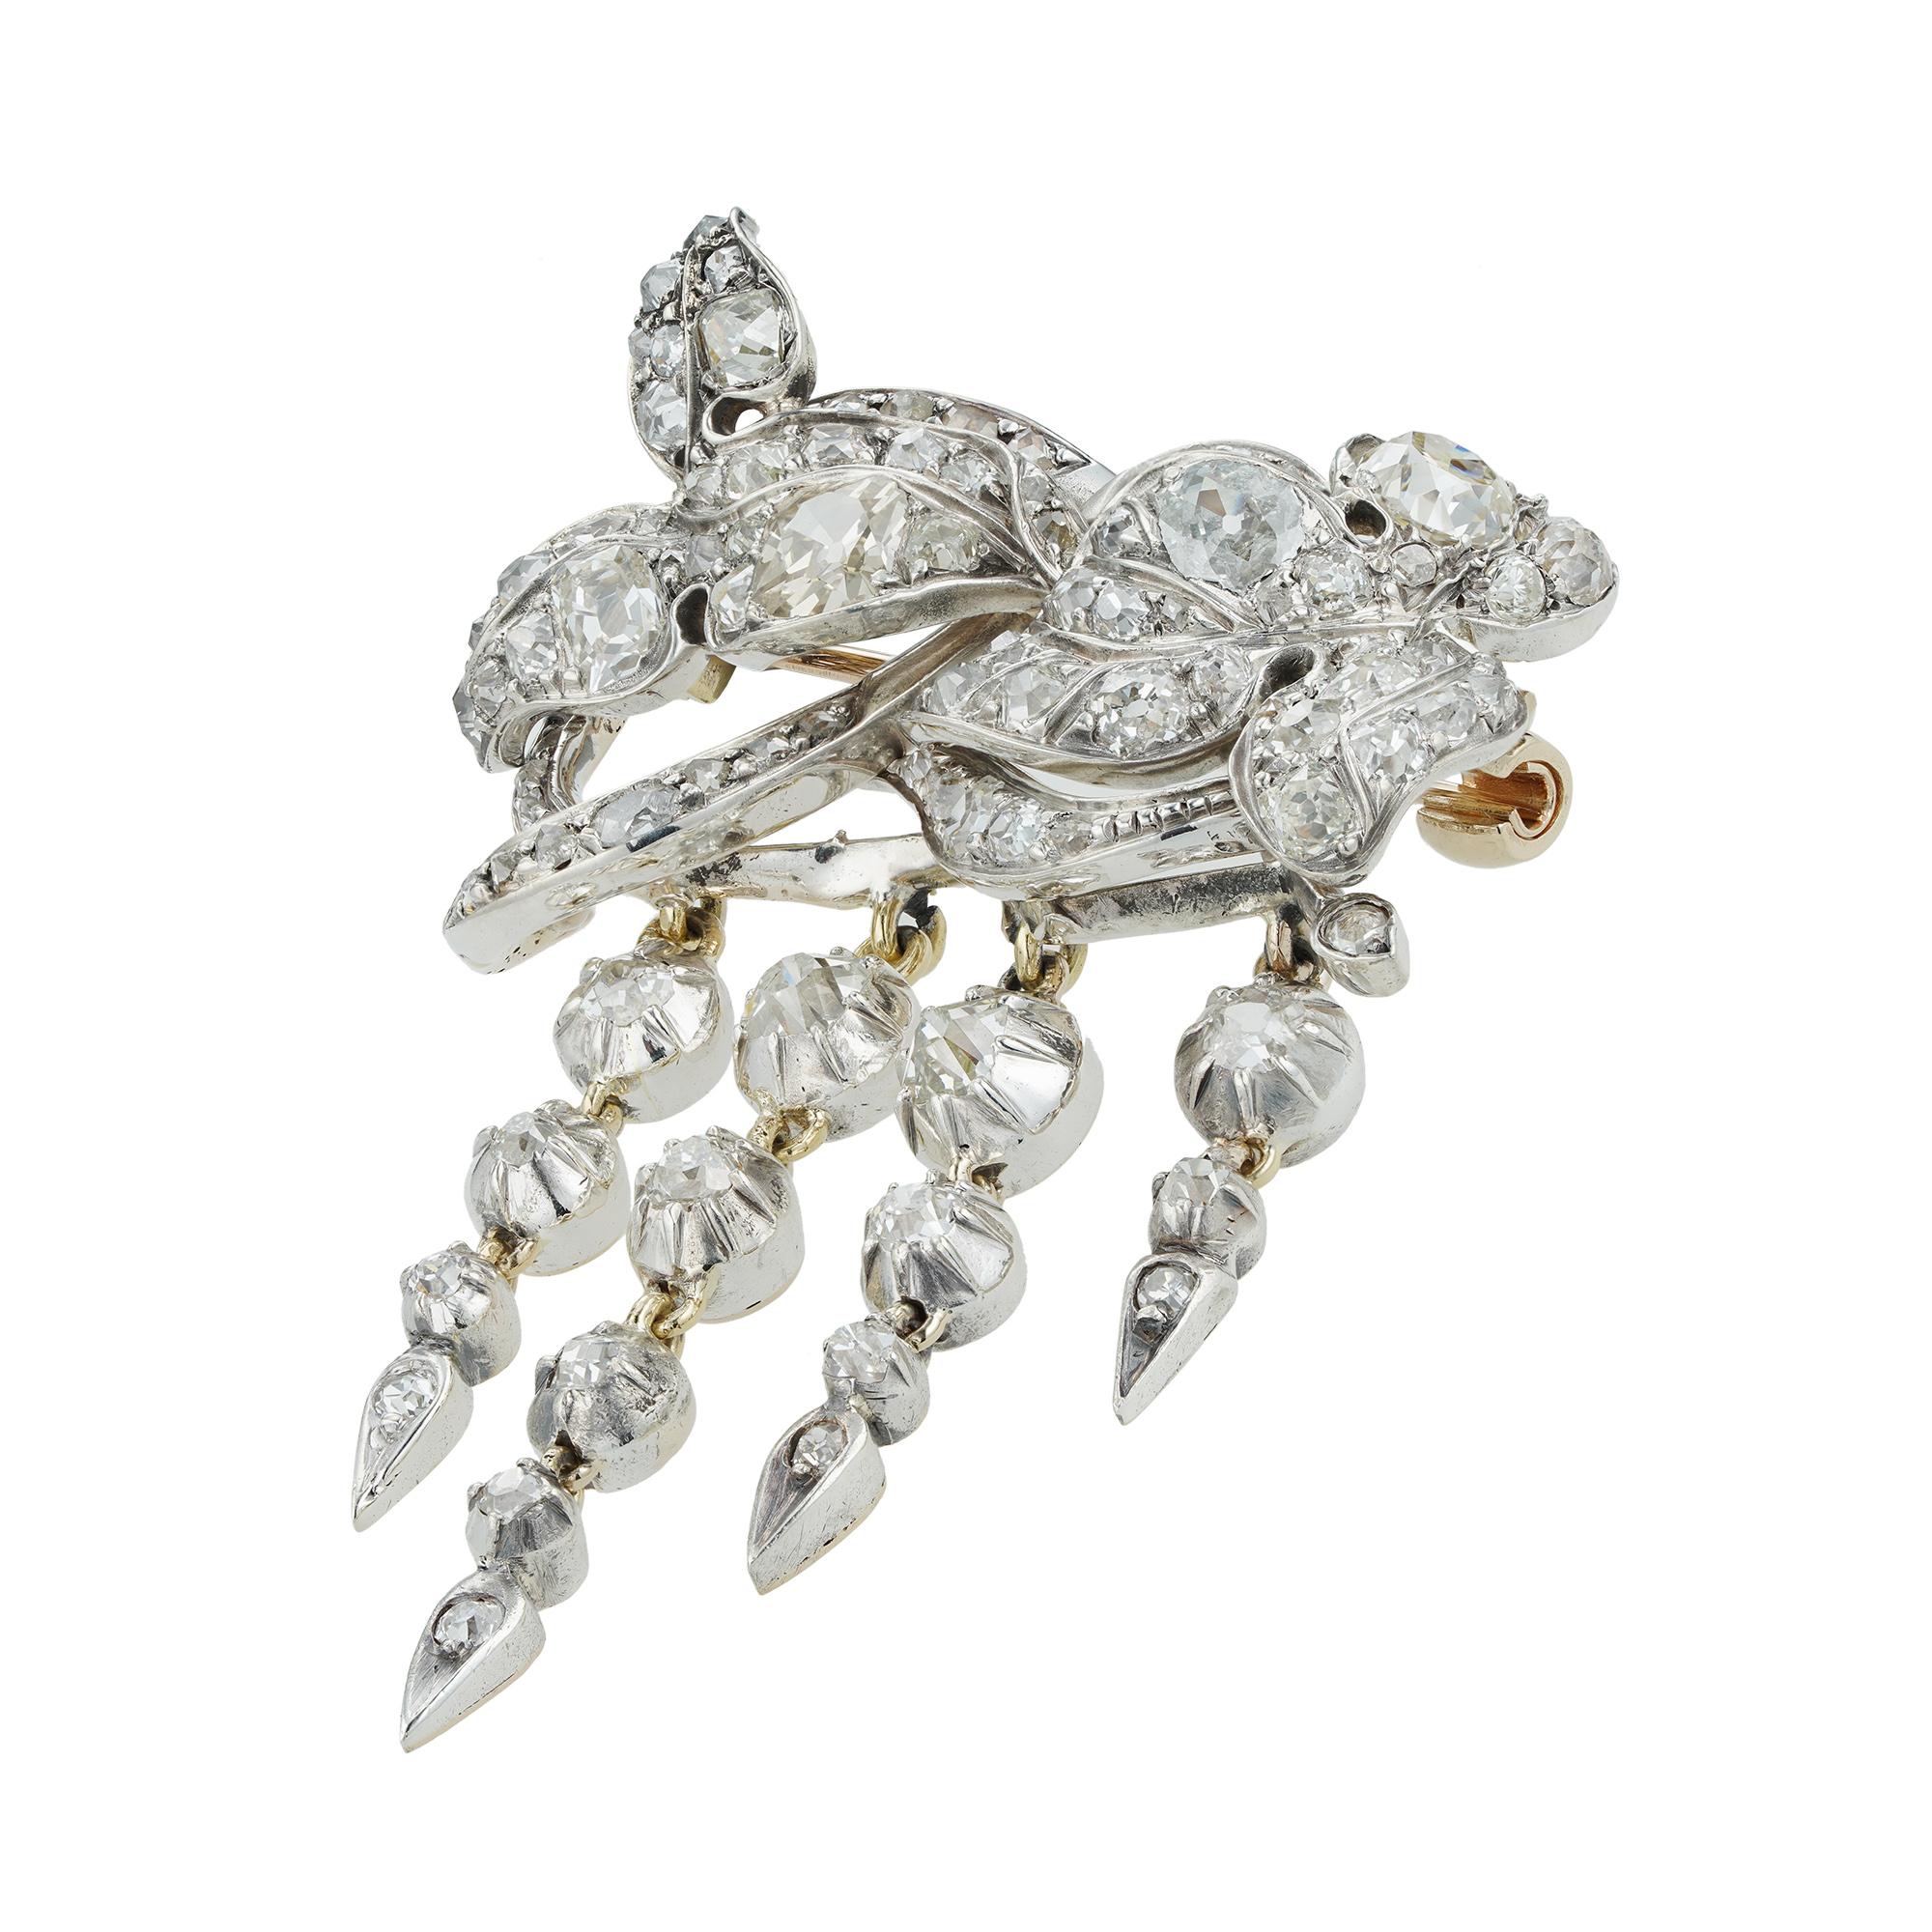 A mid-19th Century diamond brooch, designed as a miniature corsage ornament, with entwined scrolled leaves, suspending four foliate drops, all set throughout with old brilliant- and oval mixed-cut diamonds, estimated to weigh a total of 4.5 carats,